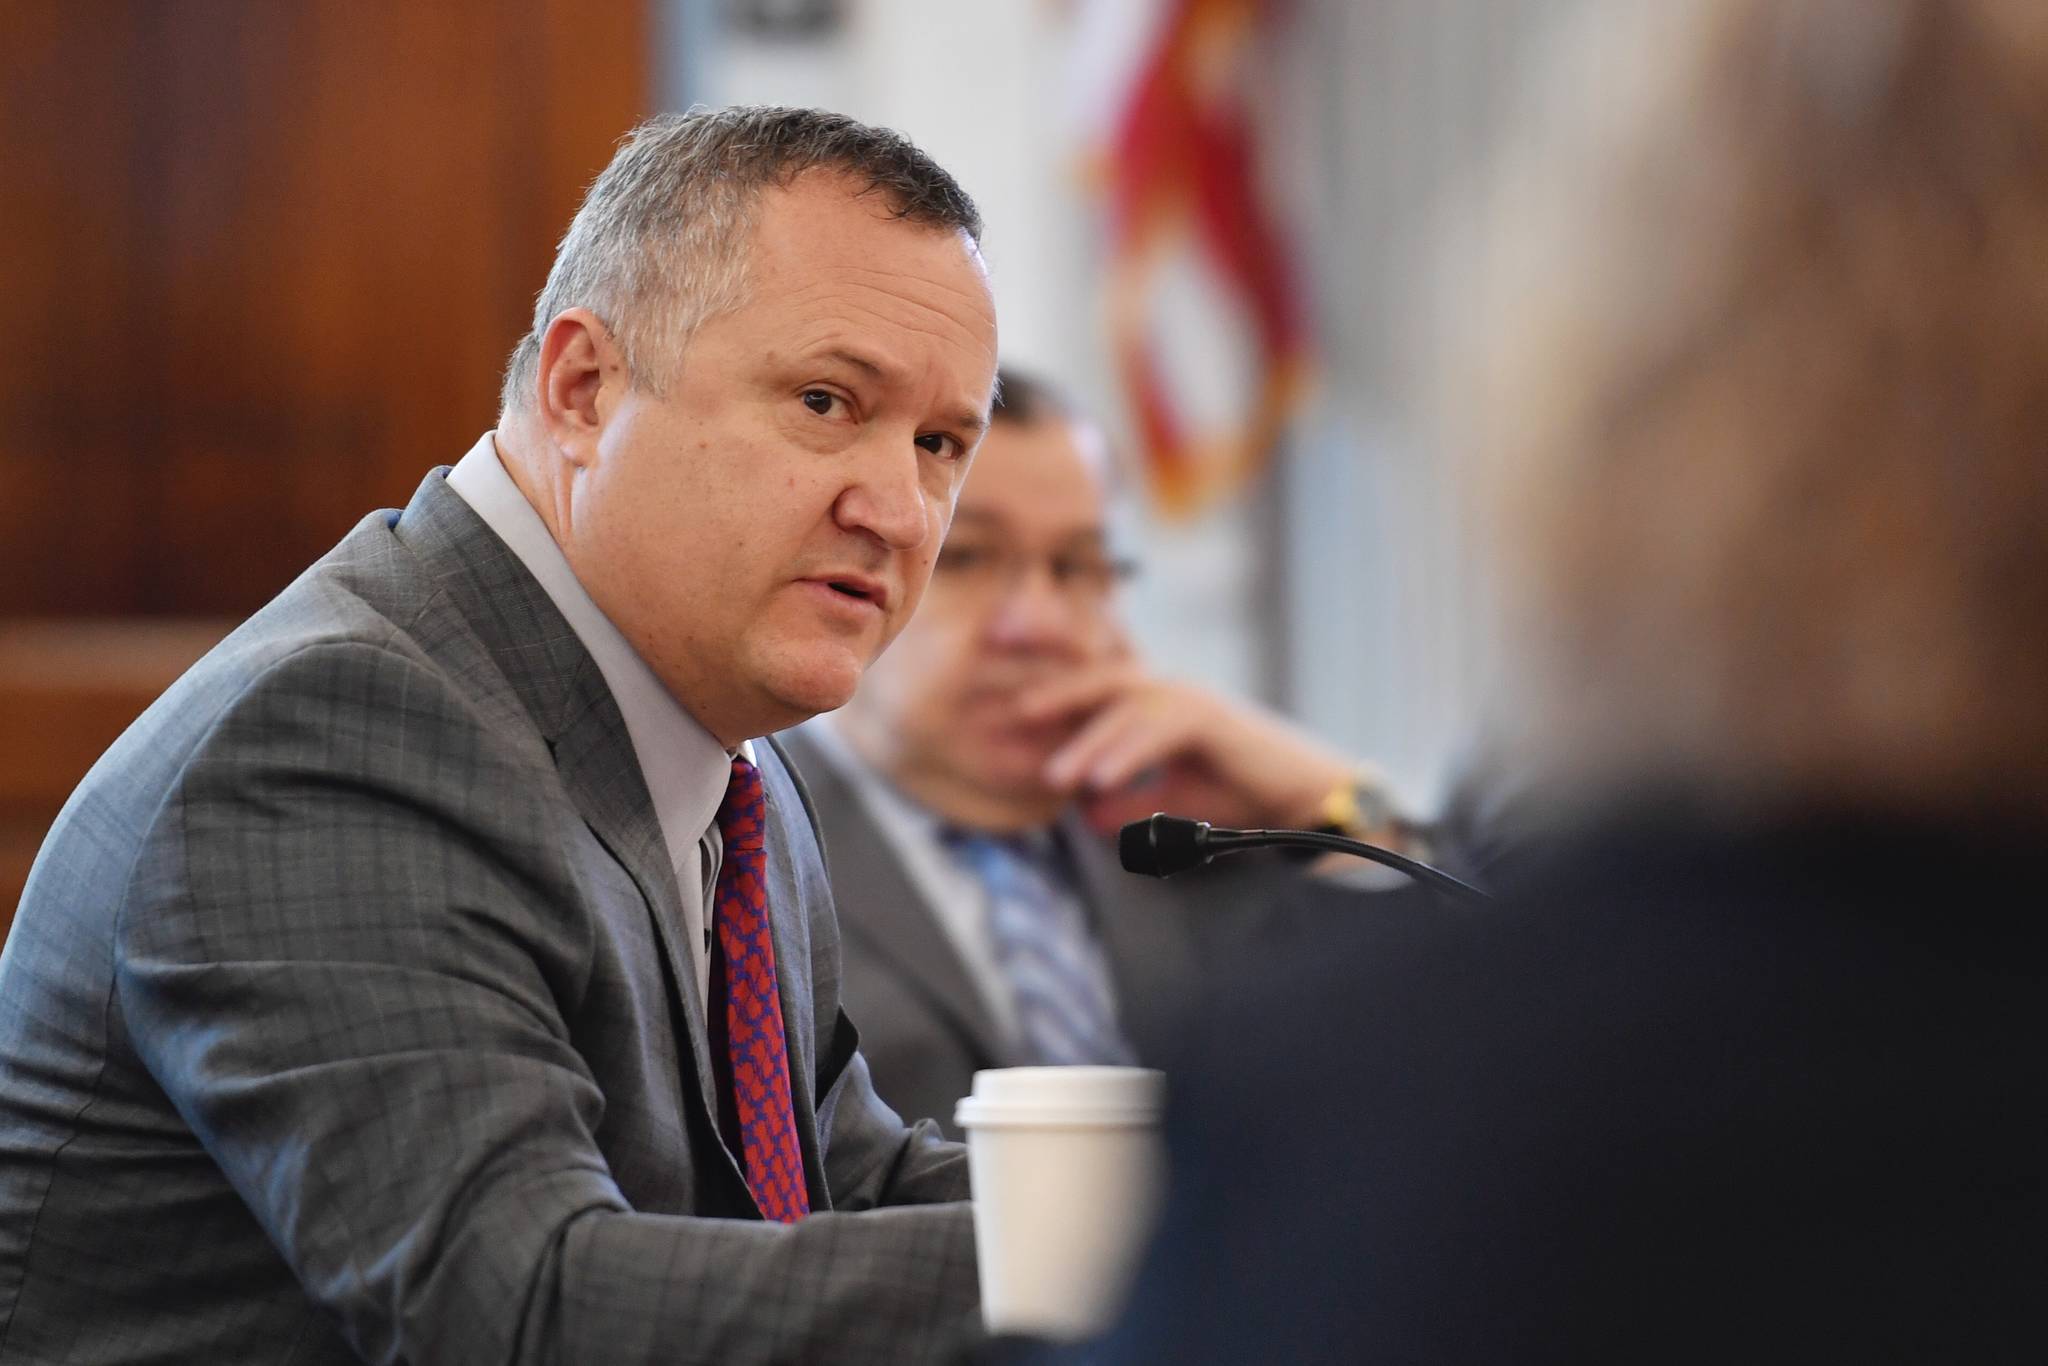 Sen. Mike Shower, R-Wasilla, questions Dr. Suzanne Allen, from Boise, Idaho, who was giving an overview of the WWAMI School of Medical Education program to the Senate Finance Committee at the Capitol on Monday, March 25, 2019. (Michael Penn | Juneau Empire)